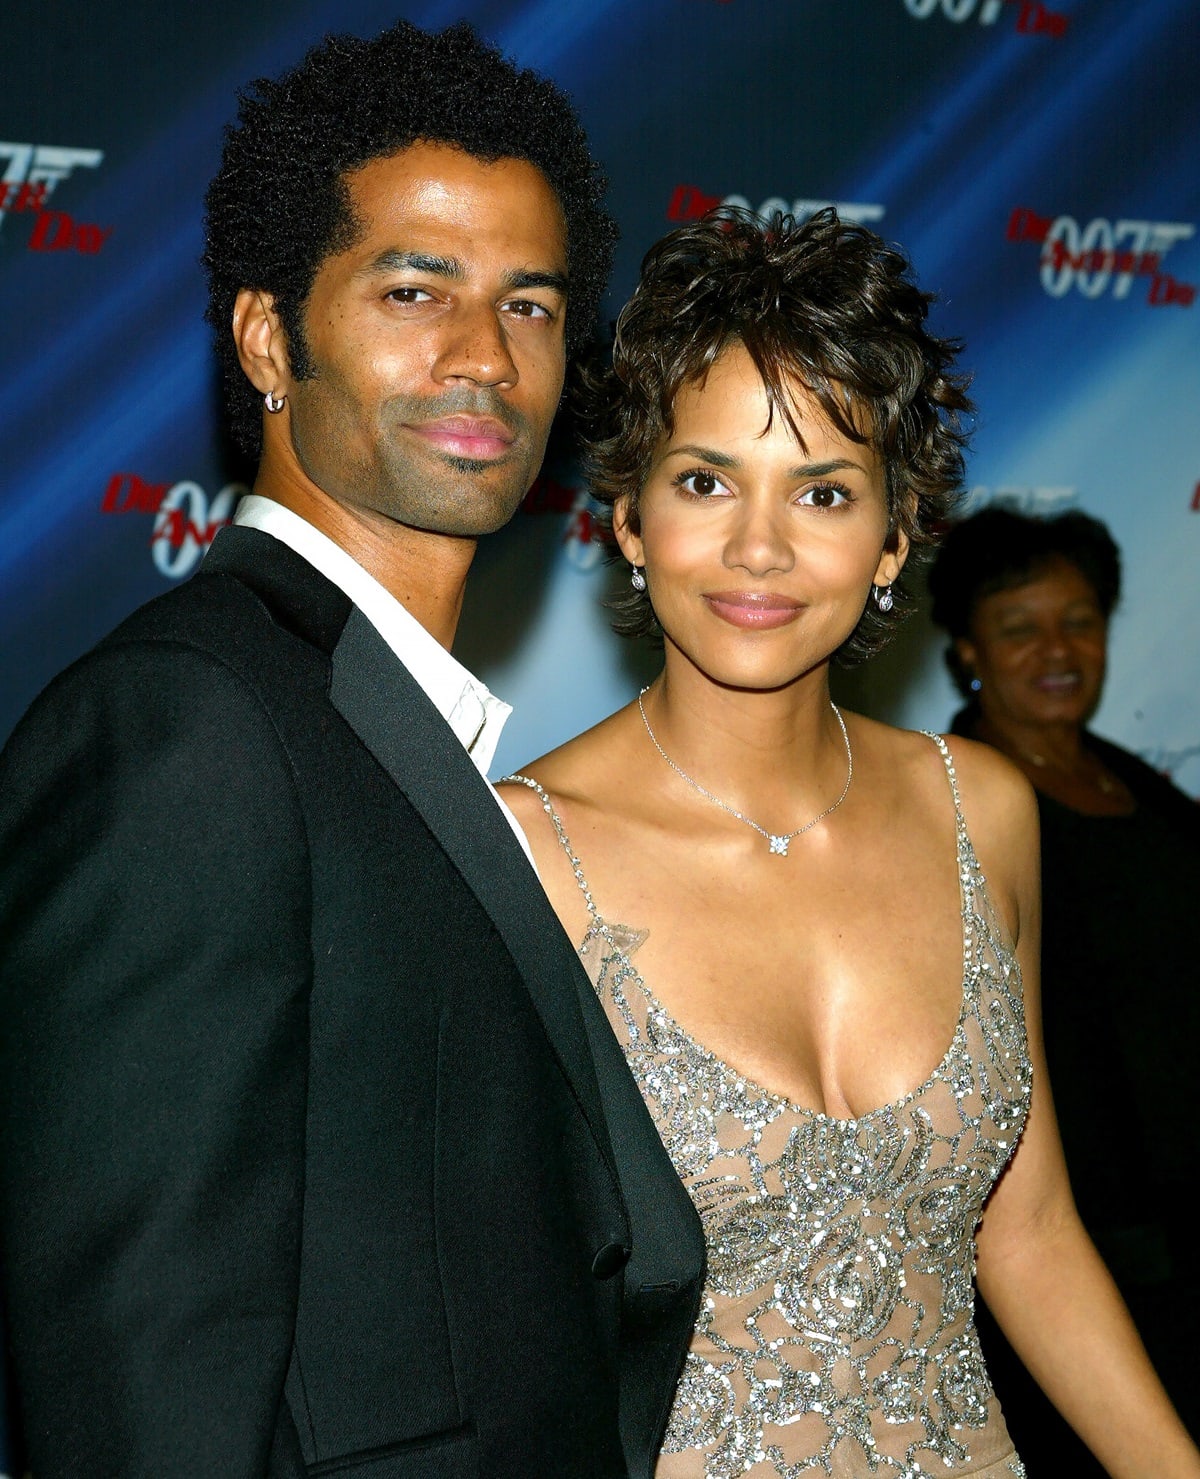 Eric Benet and Halle Berry tied the knot in 2001 and were together for three years before their divorce in 2003